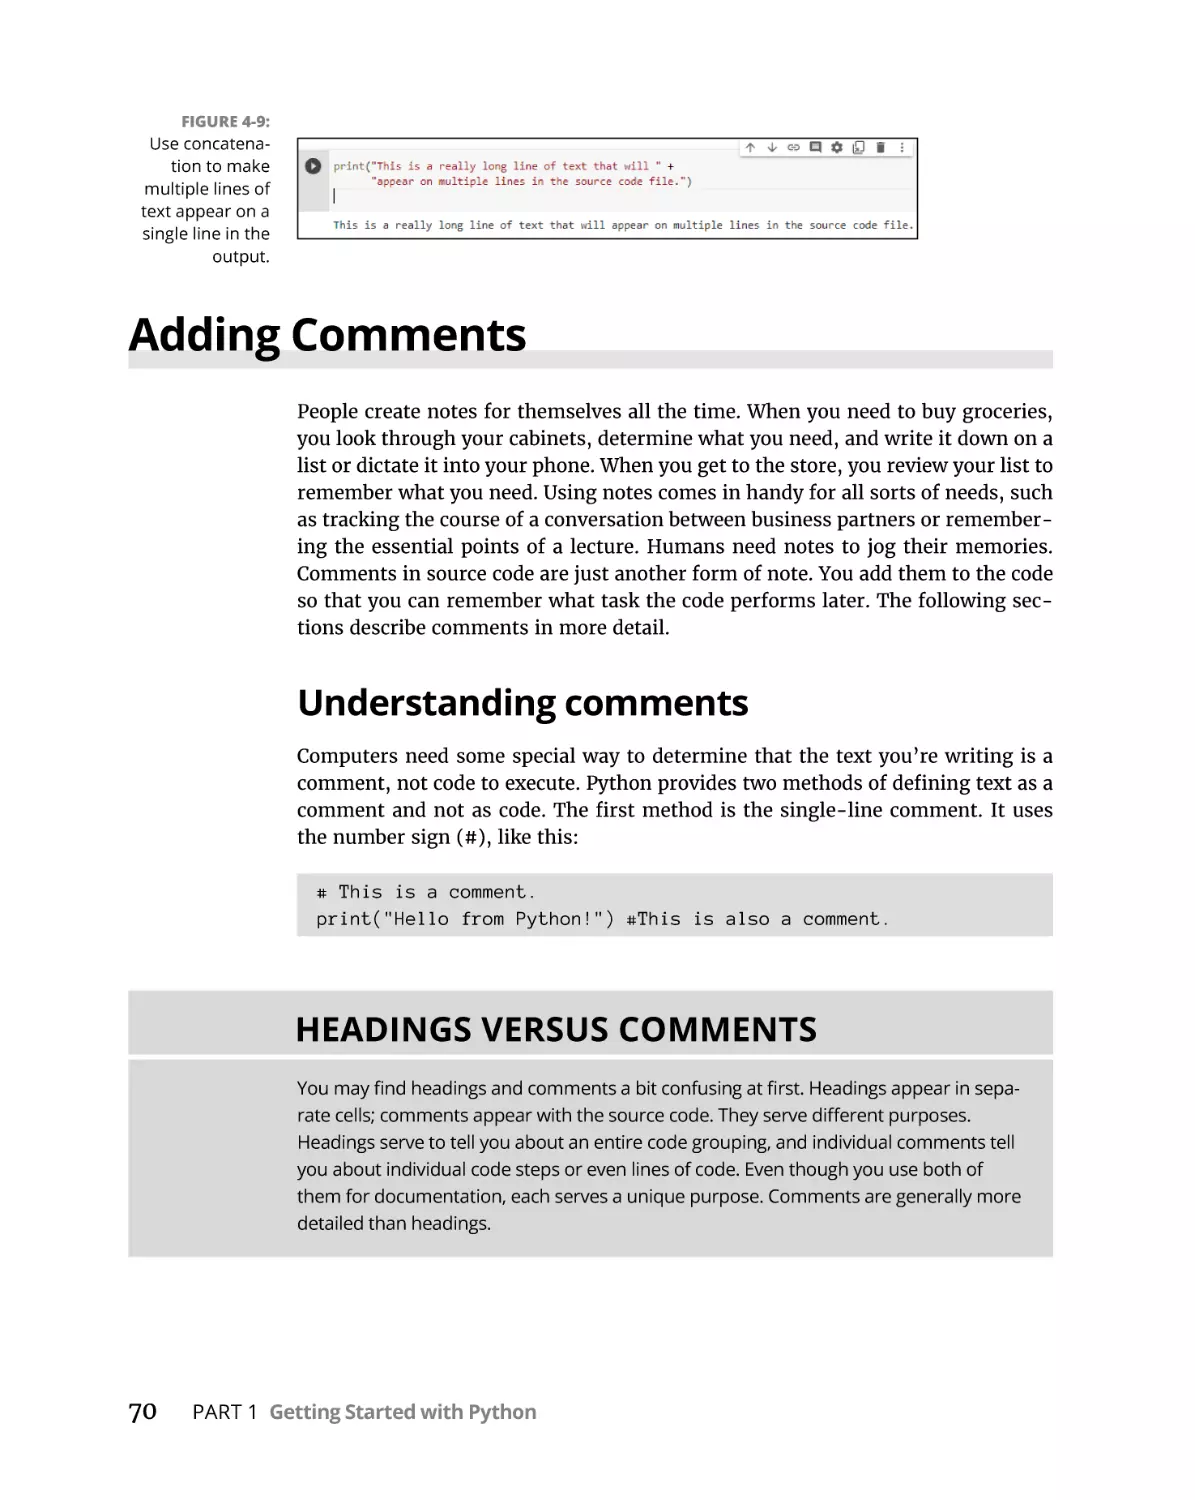 Adding Comments
Understanding comments